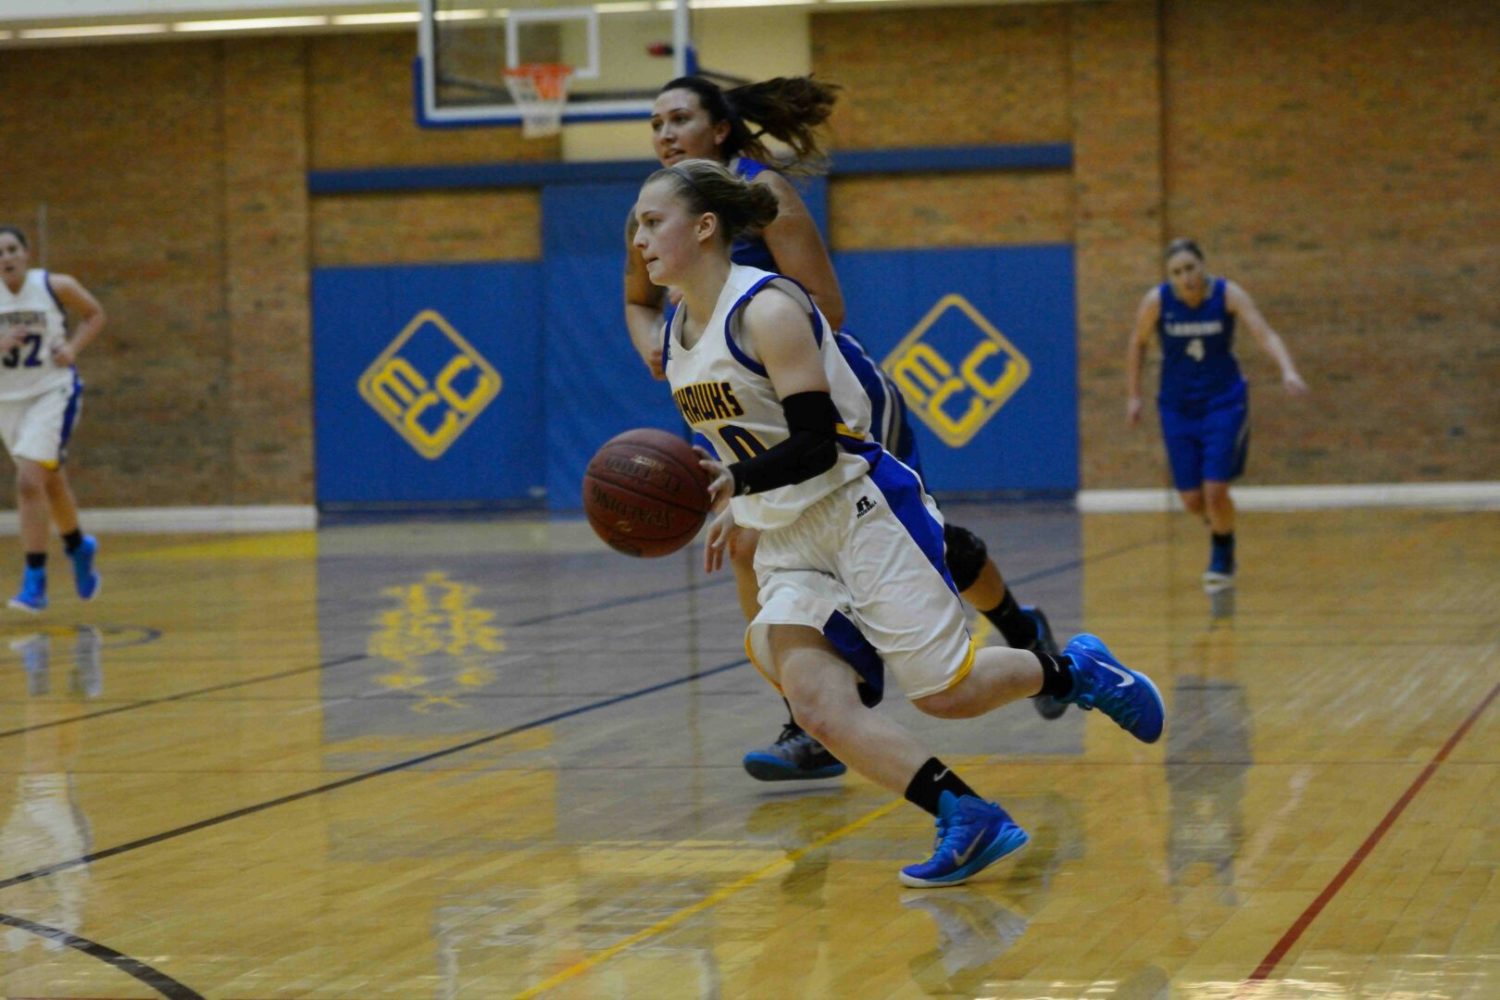 Red hot MCC women’s basketball team wraps up regular season with a 30-point win over Lansing CC